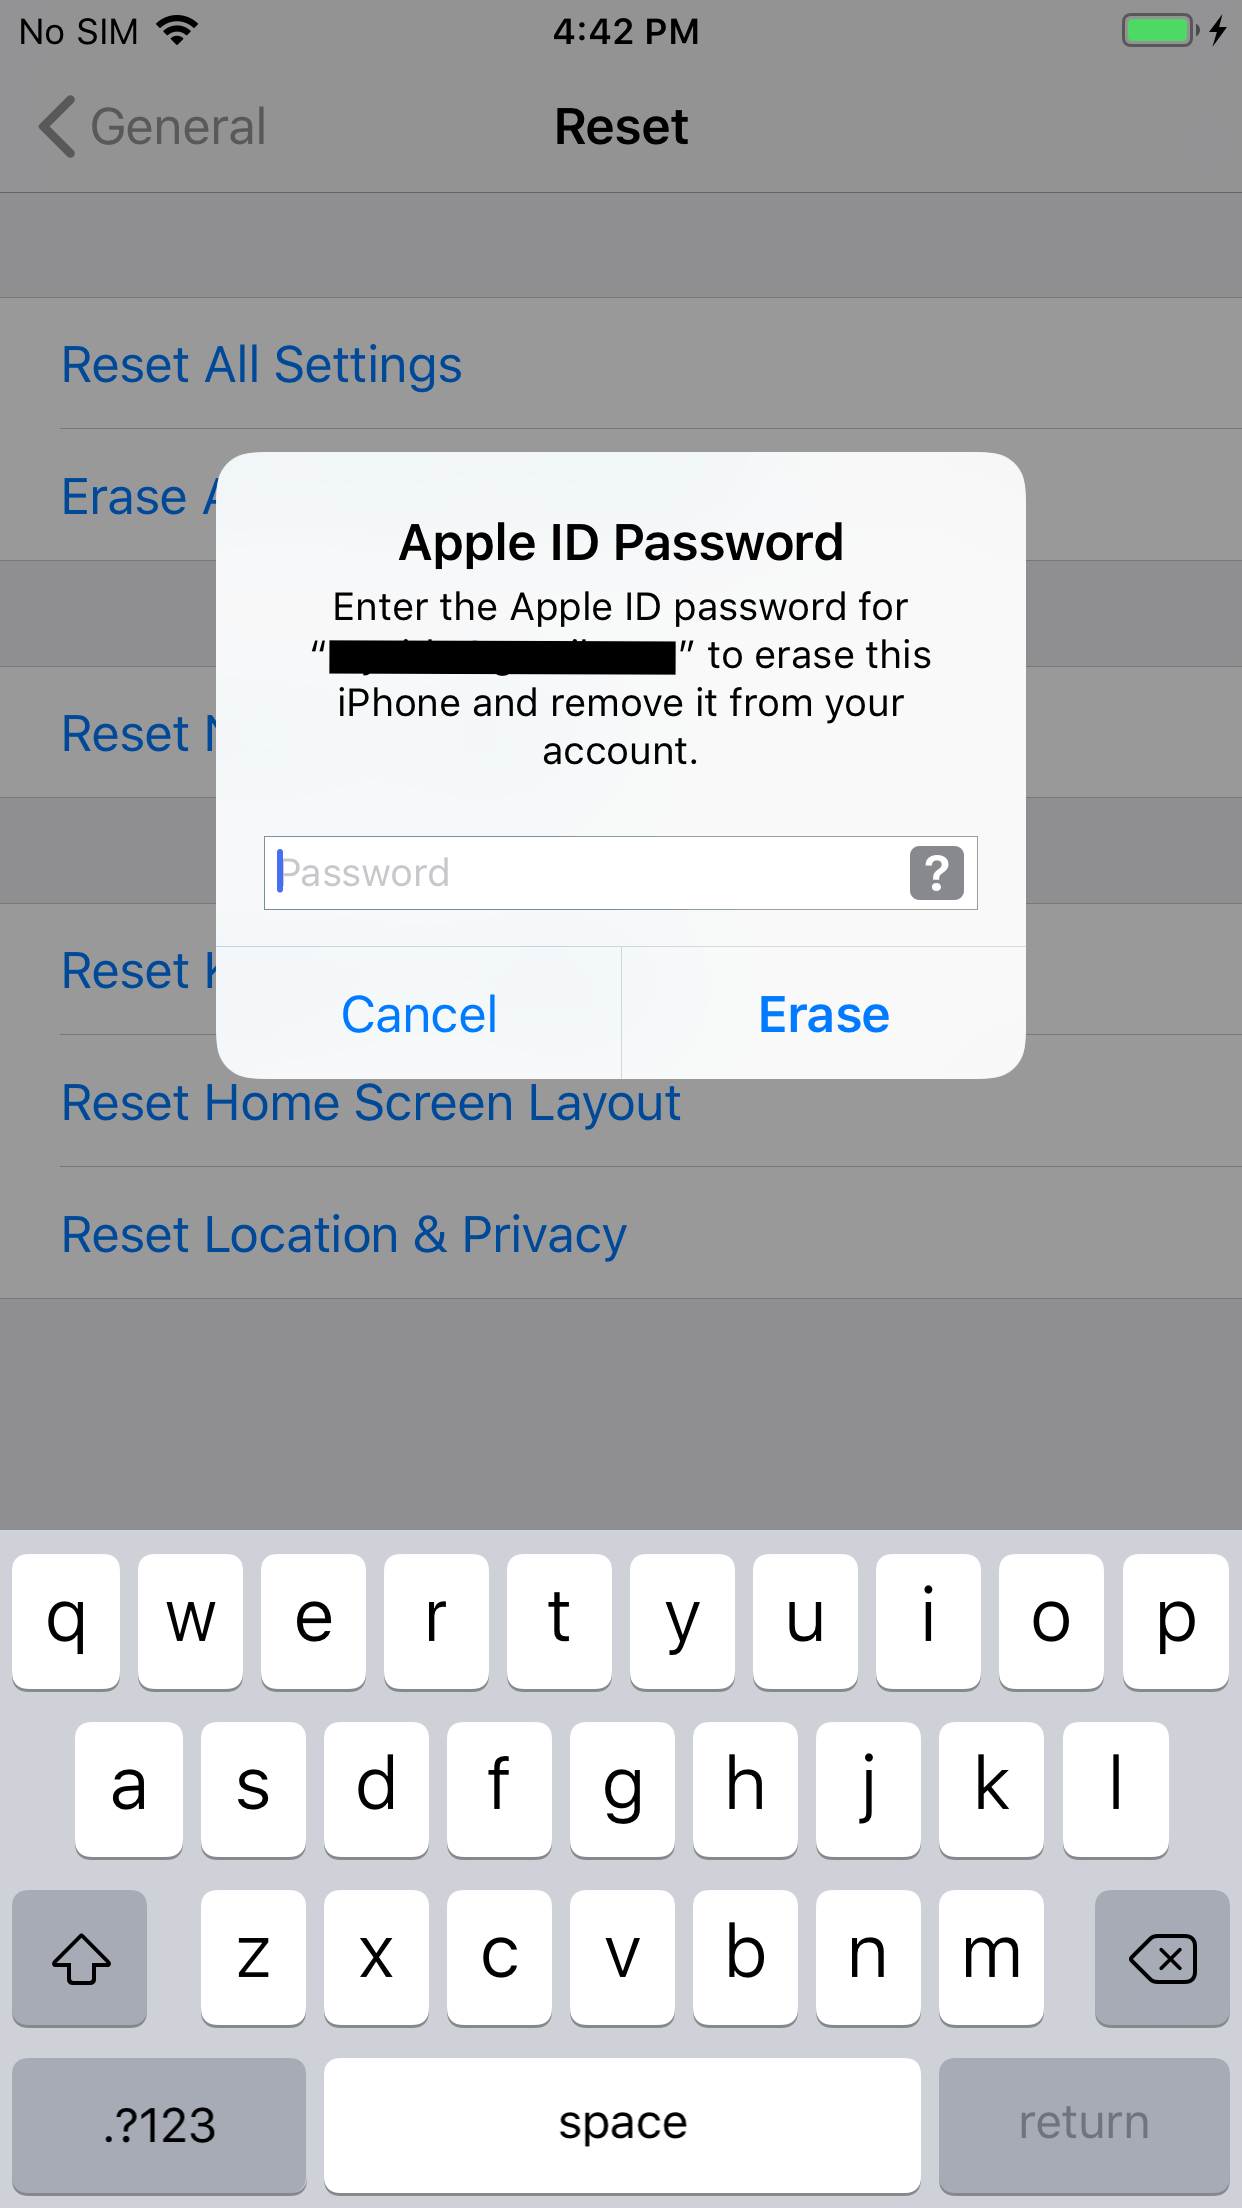 How to reset iPhone without Apple ID password?